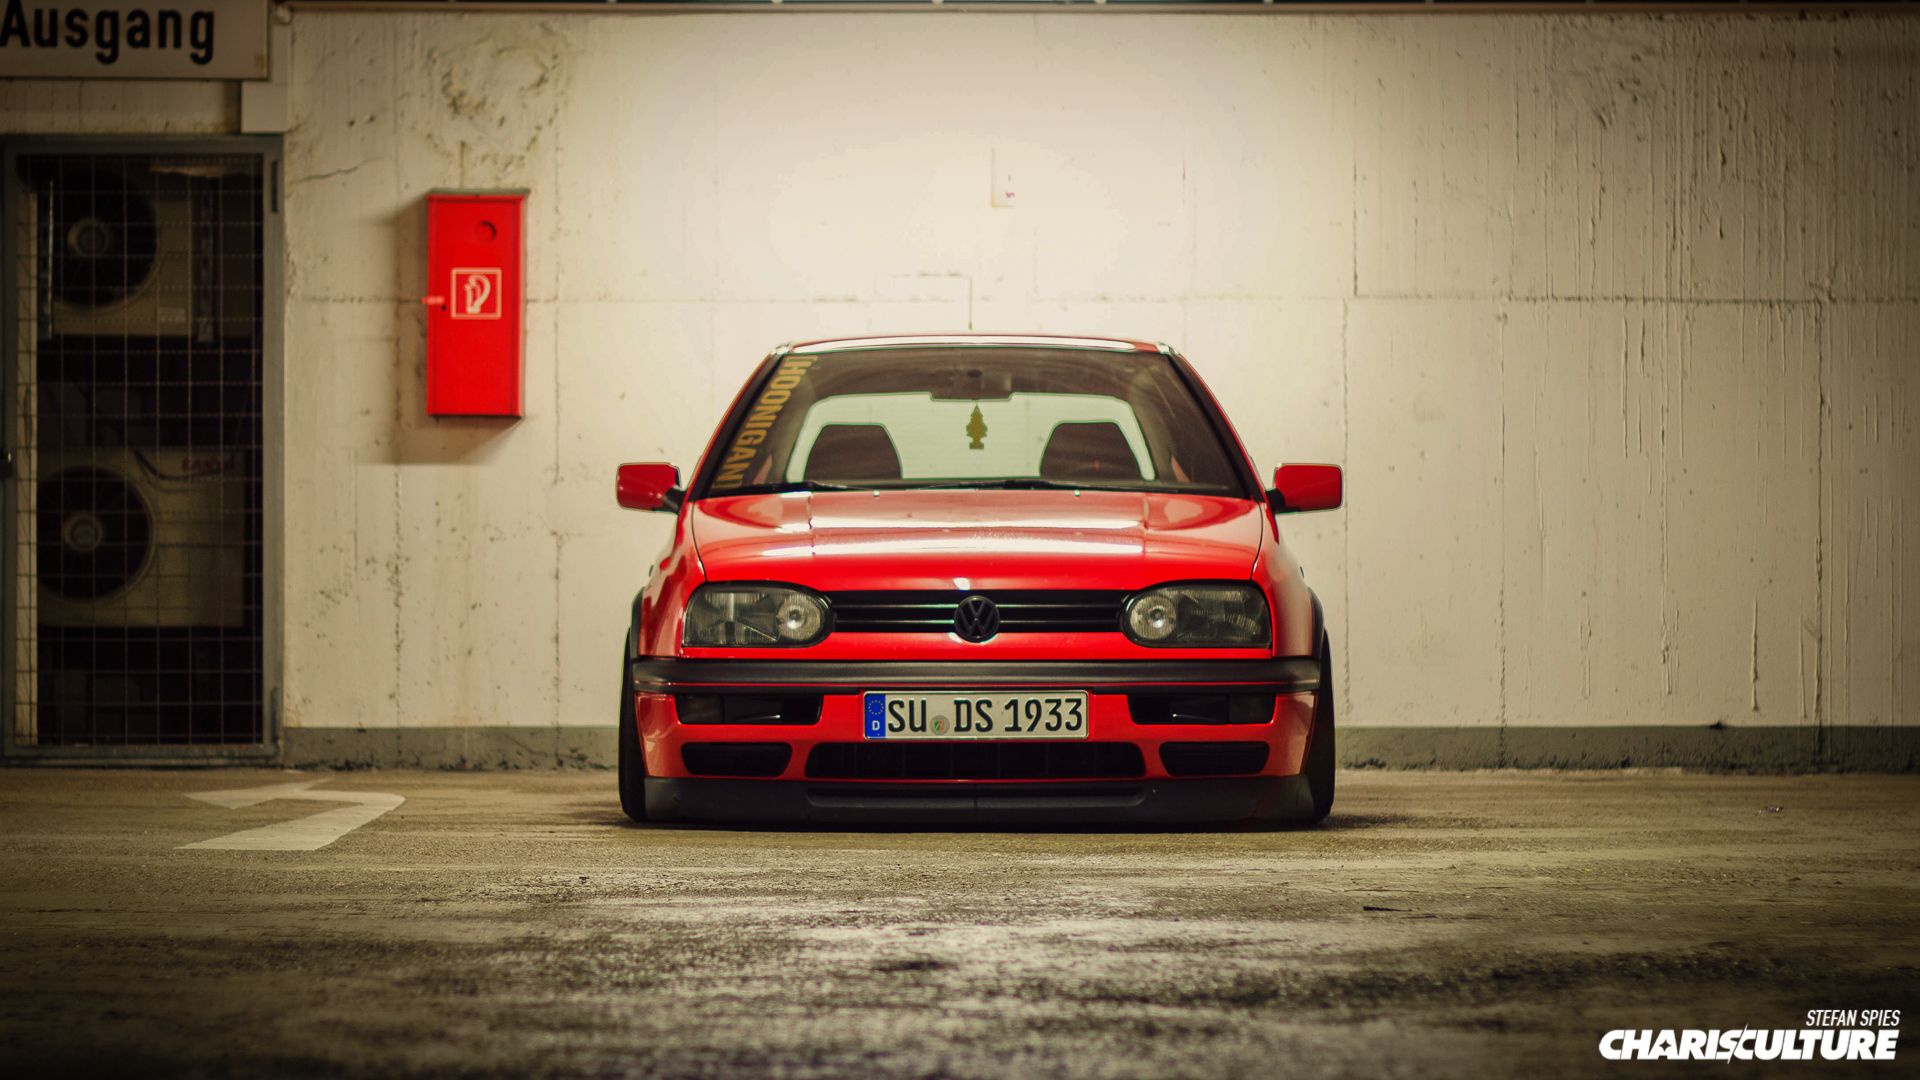 A Tribute to Stefan Spies' Daily Driven MK3 GTI